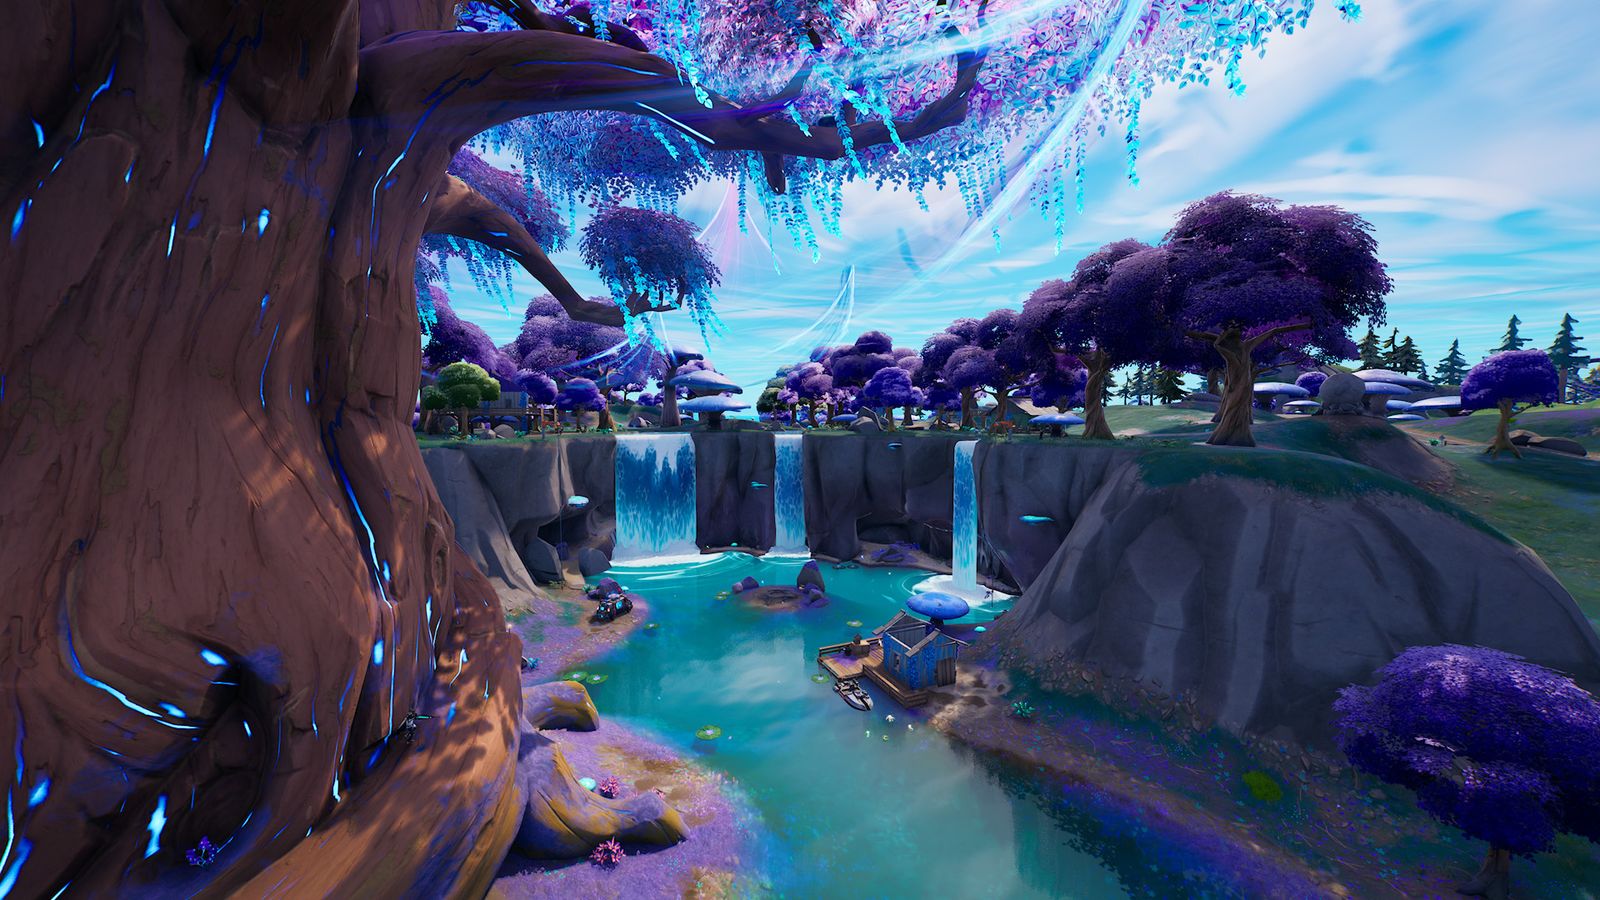 Reality Falls is featured in the Fortnite Week 11 Quests